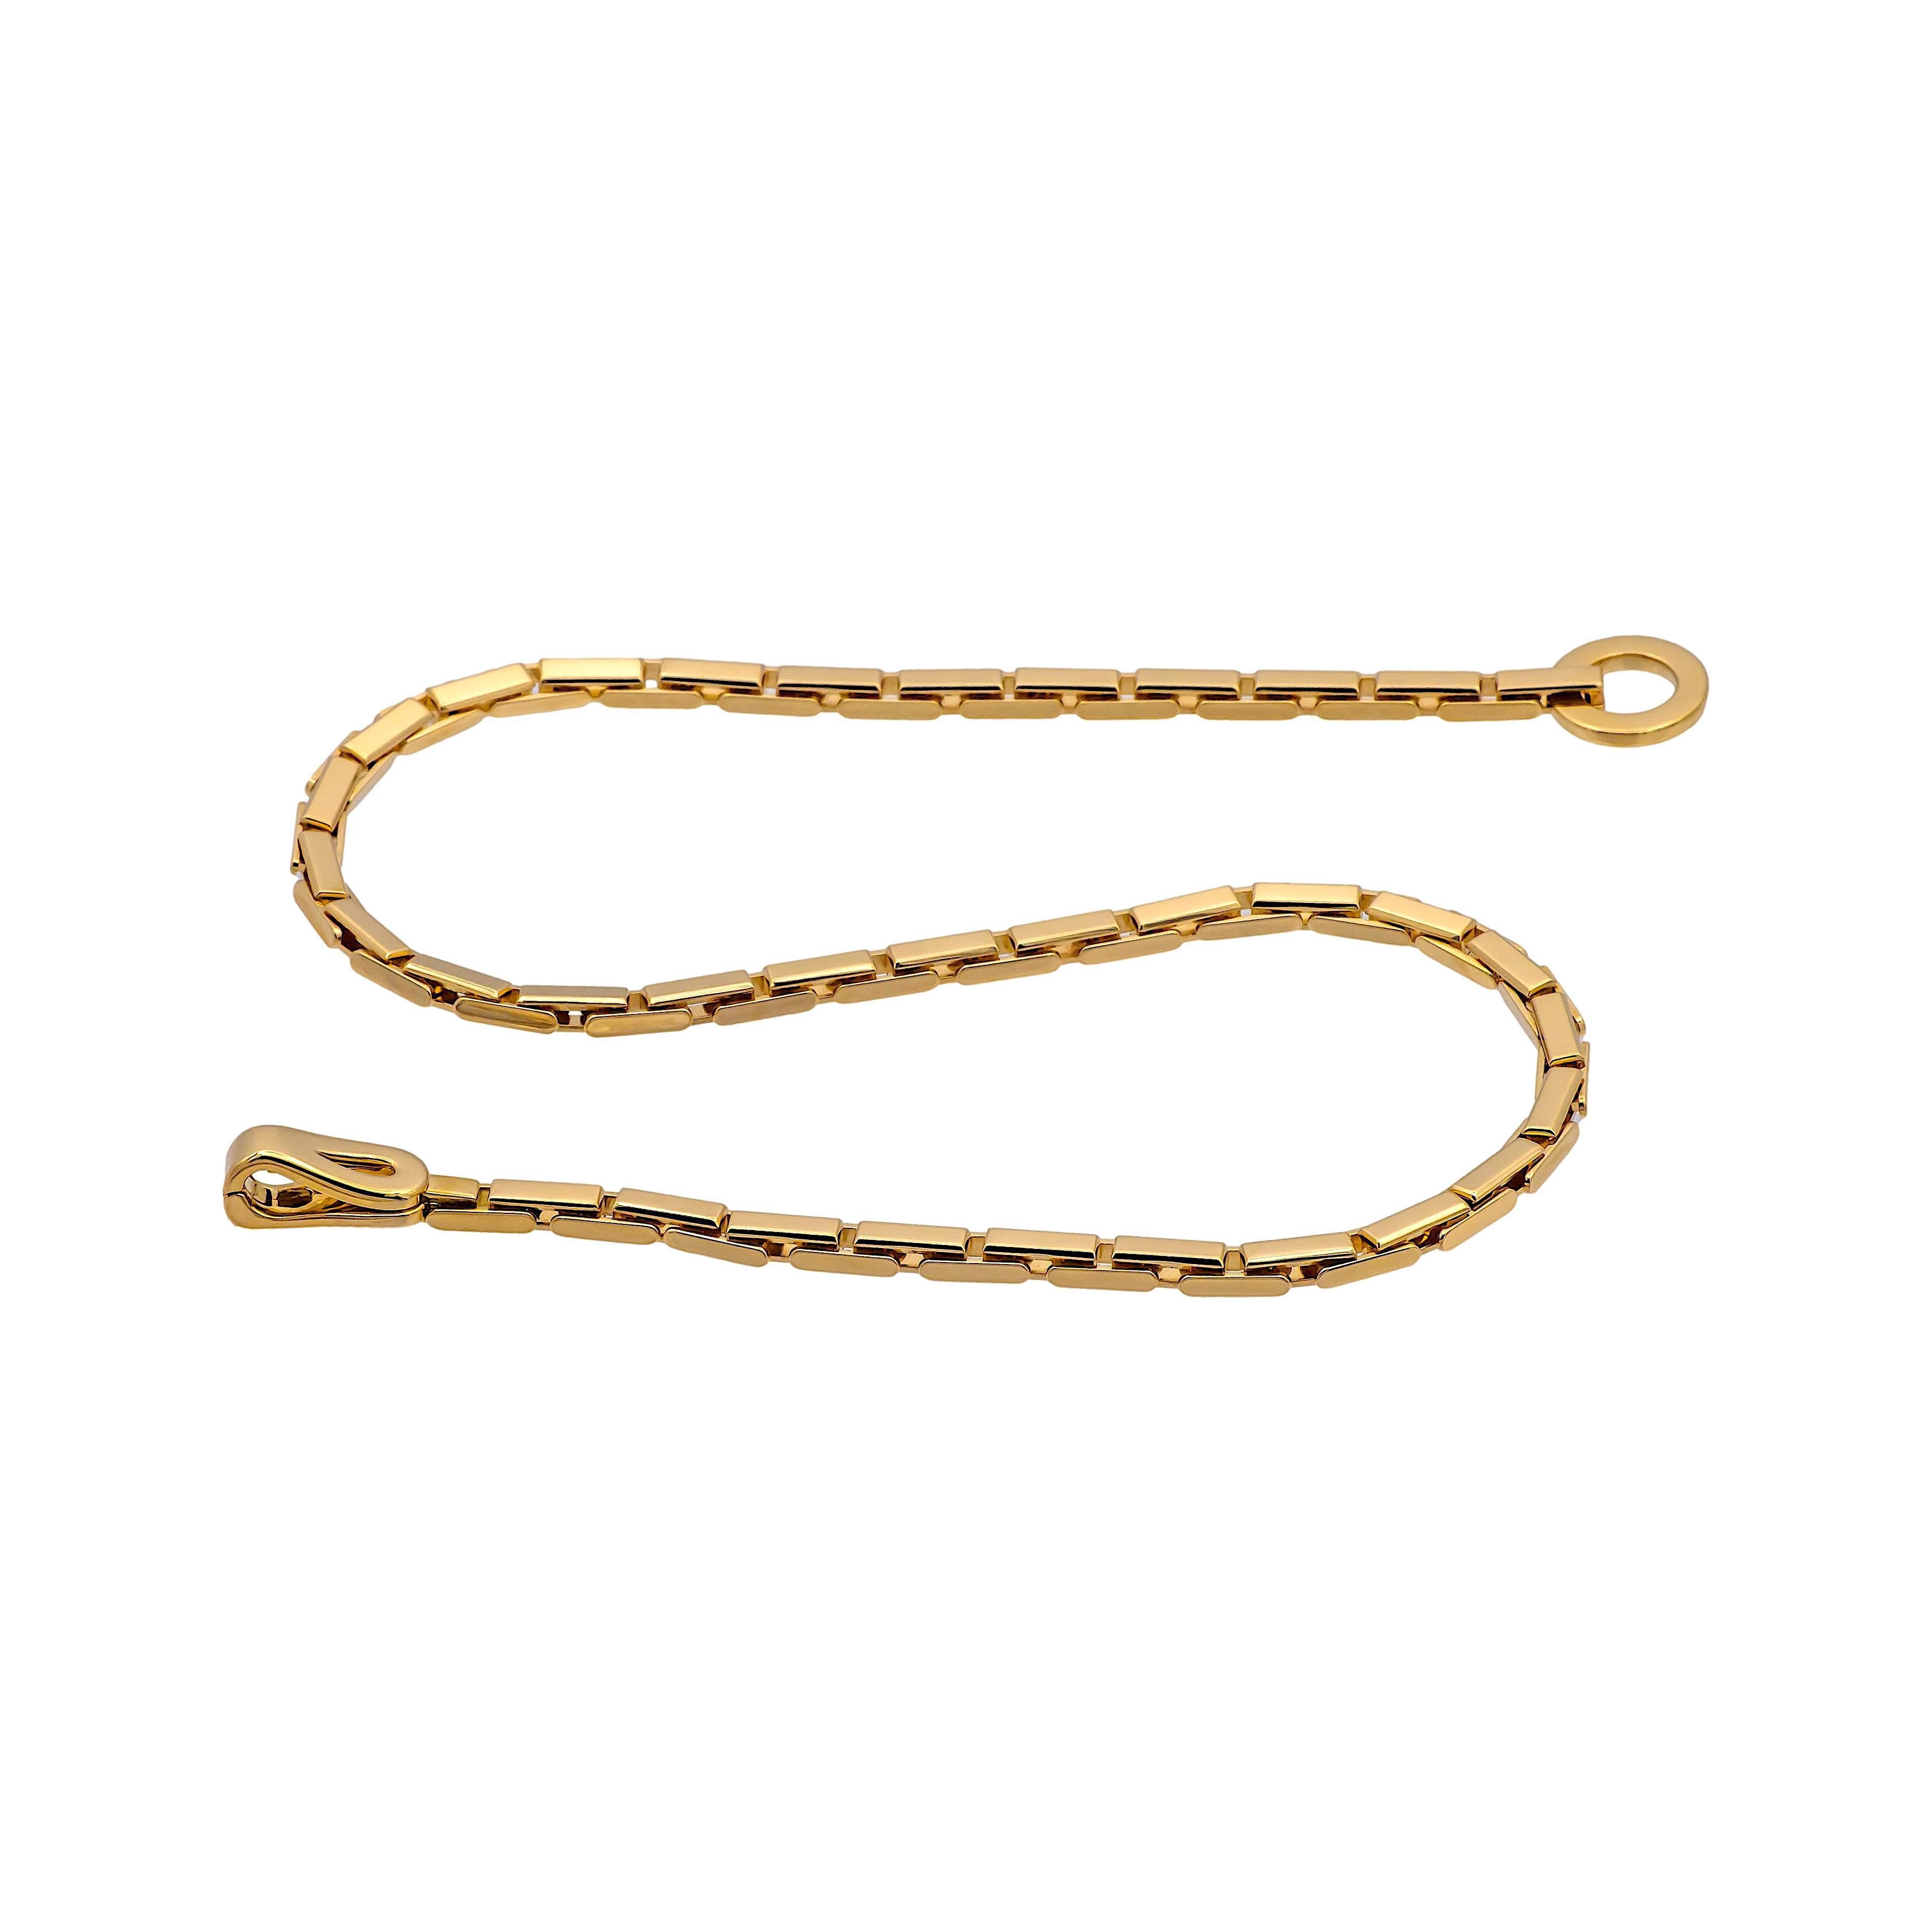 Pre-Owned Cartier gold necklace from the Agrafe collection finely crafted in 18 Karat yellow gold featuring a unique clasp consisting of a an open circle and hook closure. The necklace has the classic Cartier bar links measuring 3.6 mm wide and 16